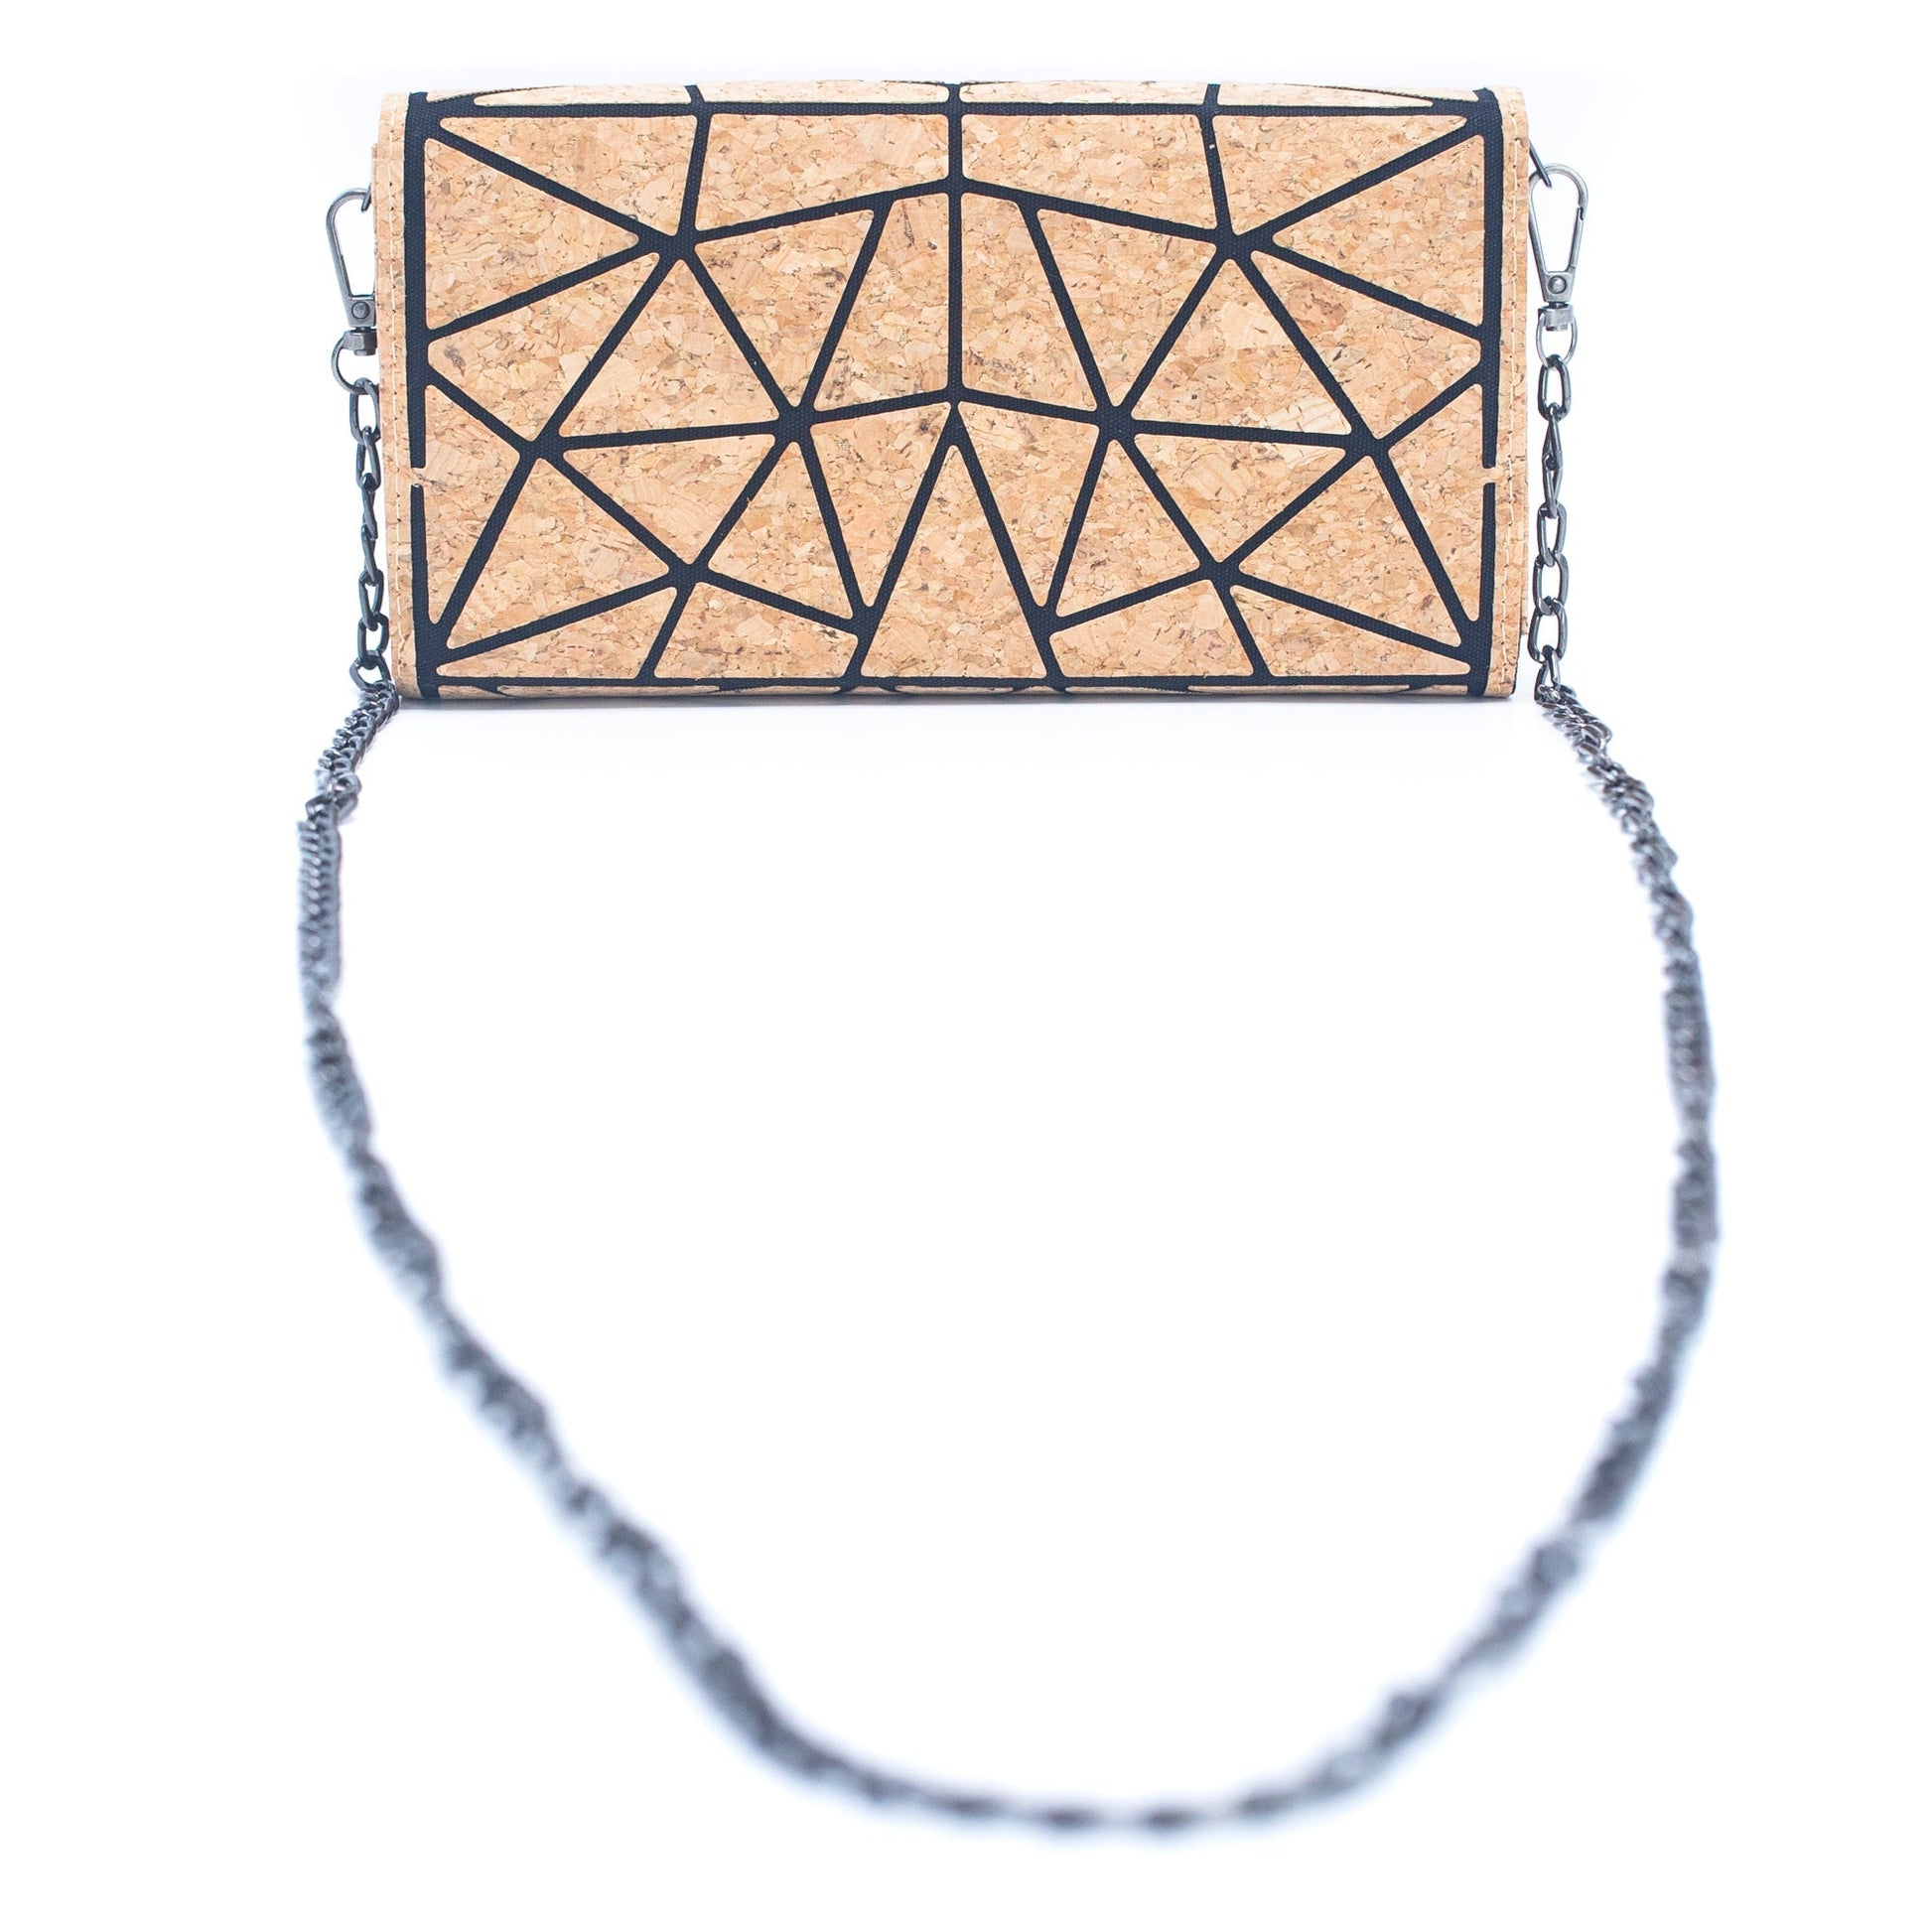 Geometric Natural Cork Phone Wallet Crossbody | THE CORK COLLECTION